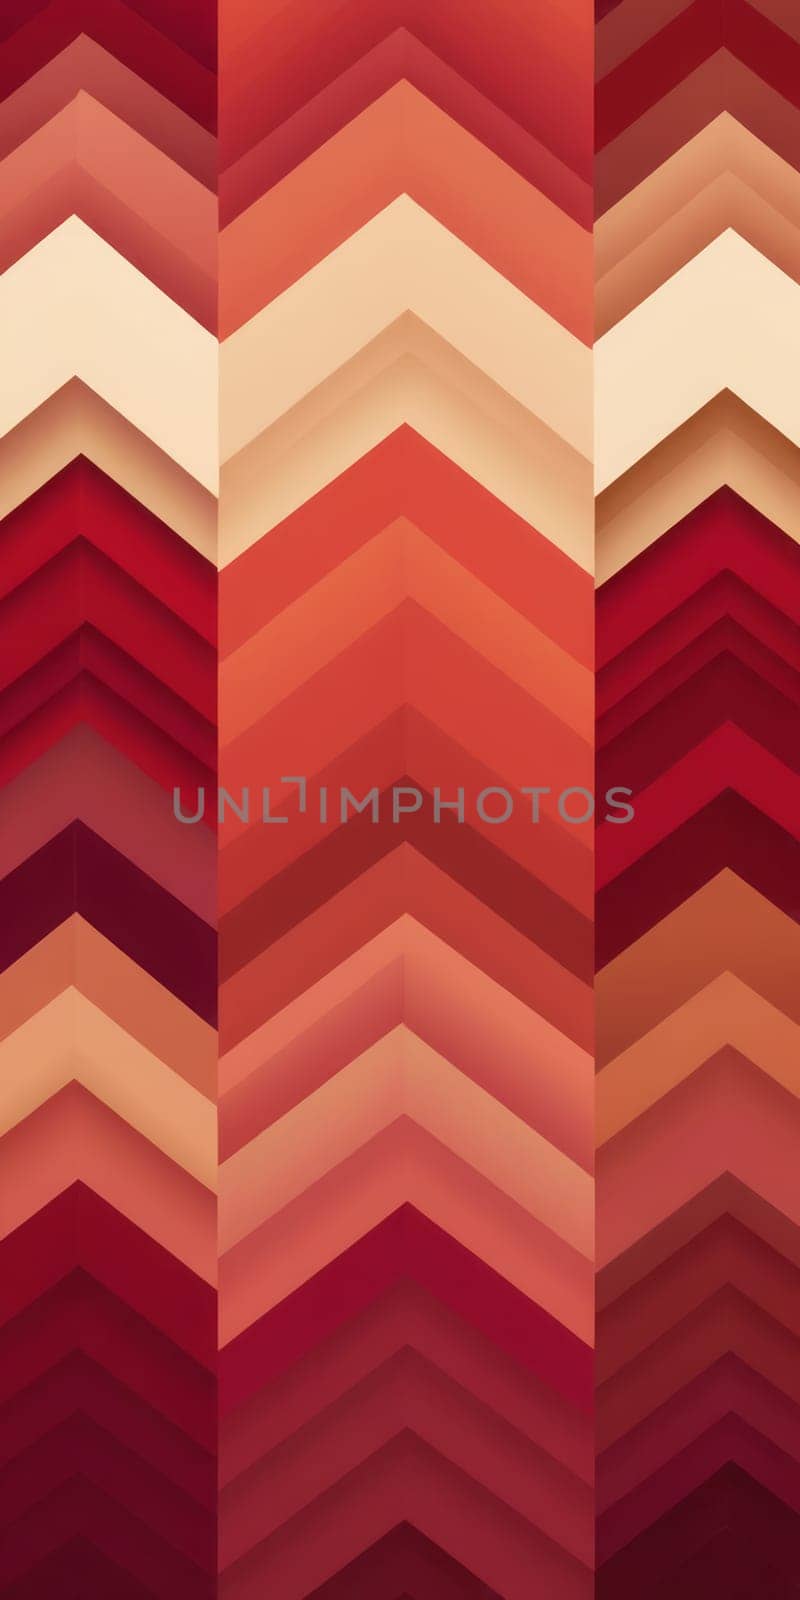 Gabled Shapes in Maroon Linen by nkotlyar